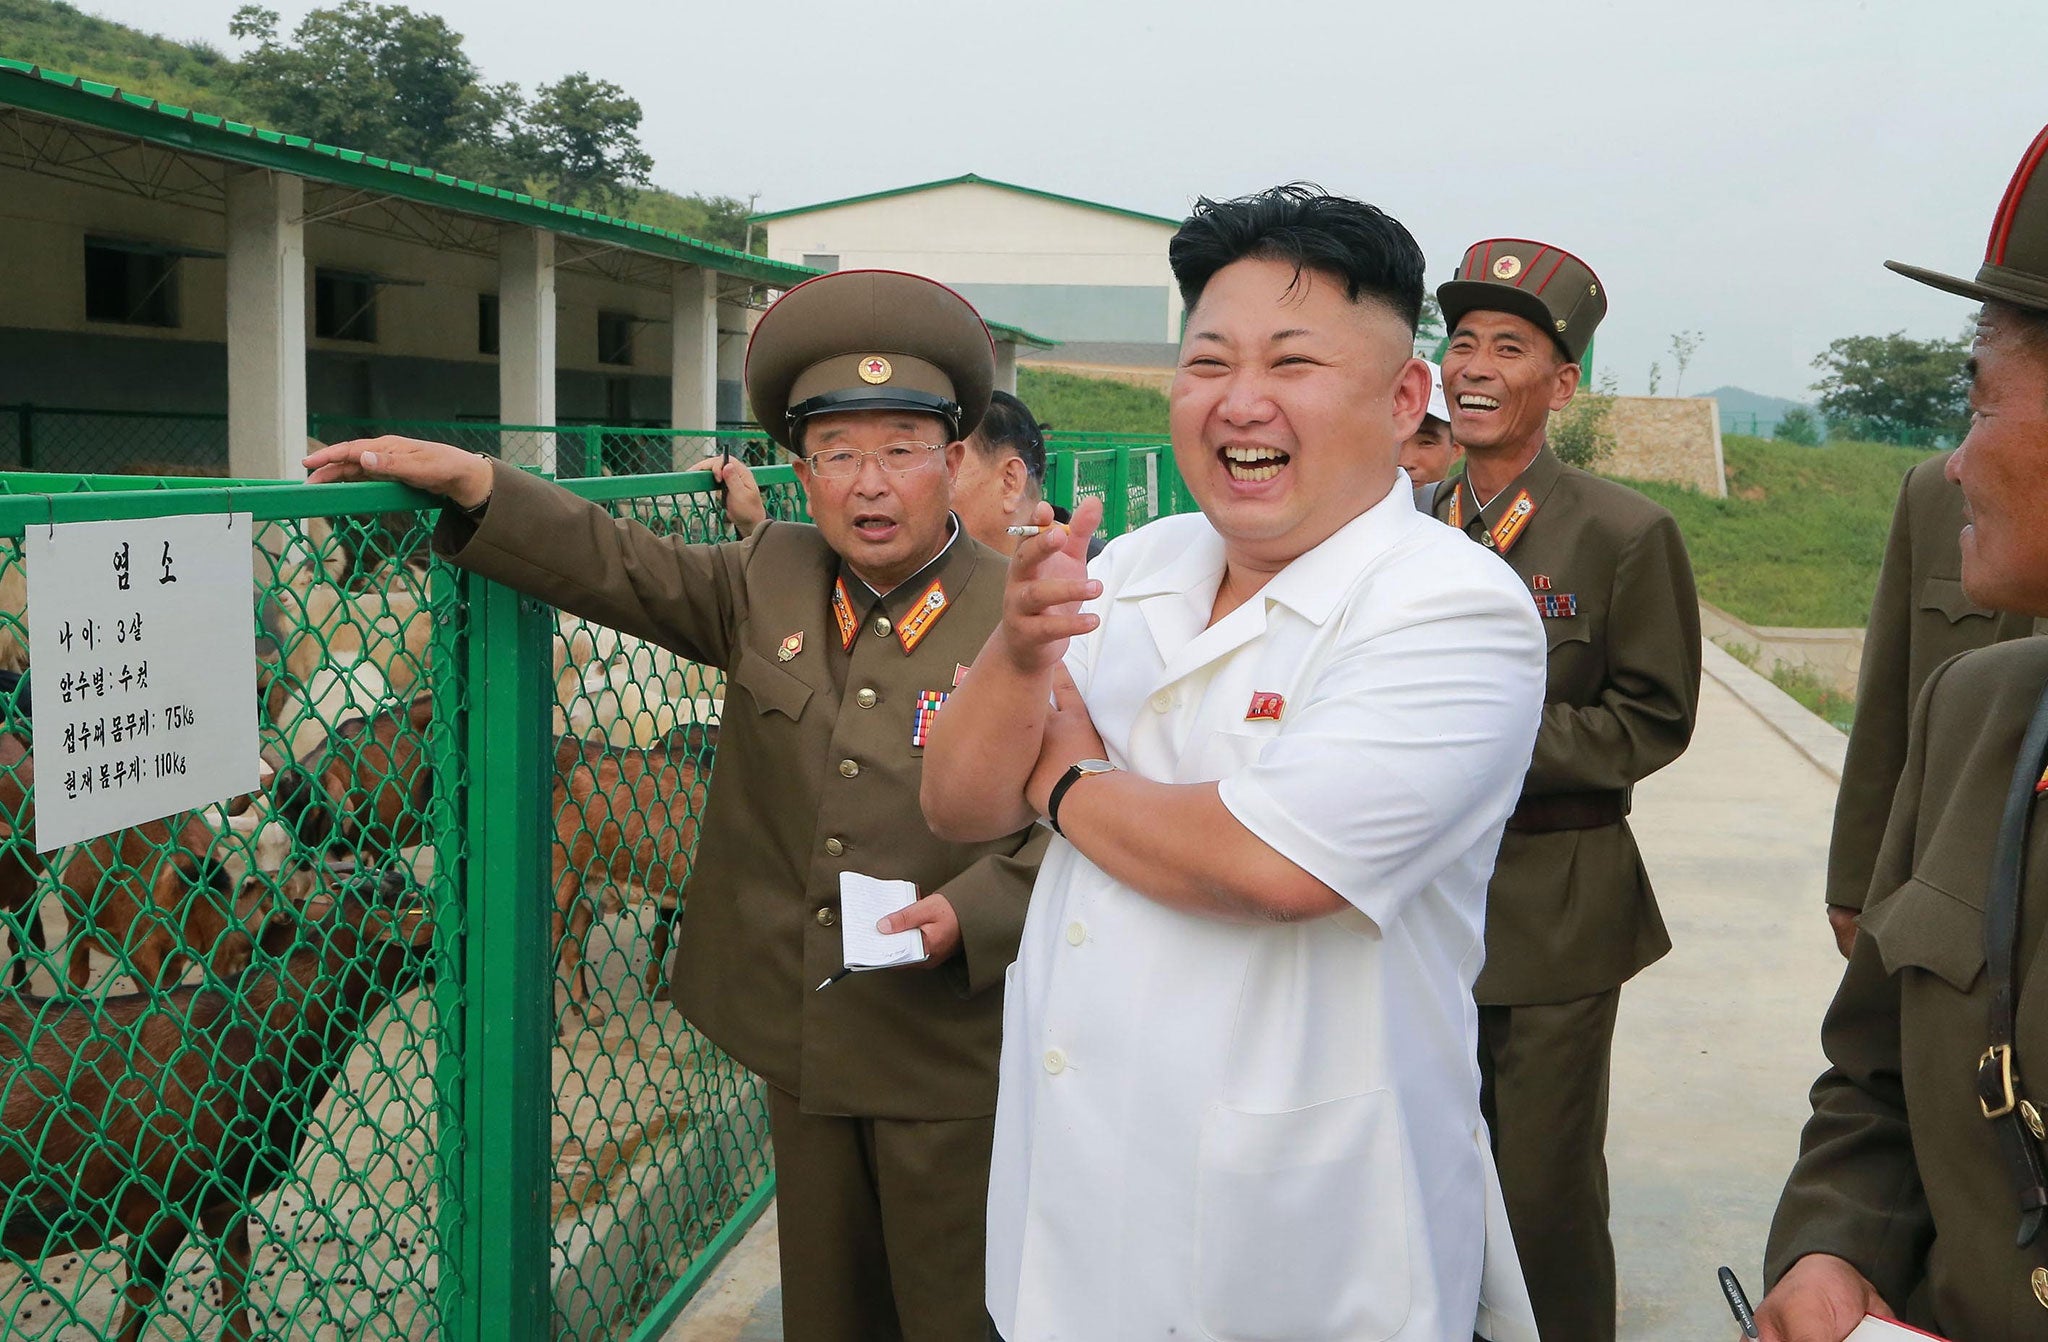 Health rumours swirl around North Korea's Kim Jong-un, who has failed to appear in public for nearly three weeks